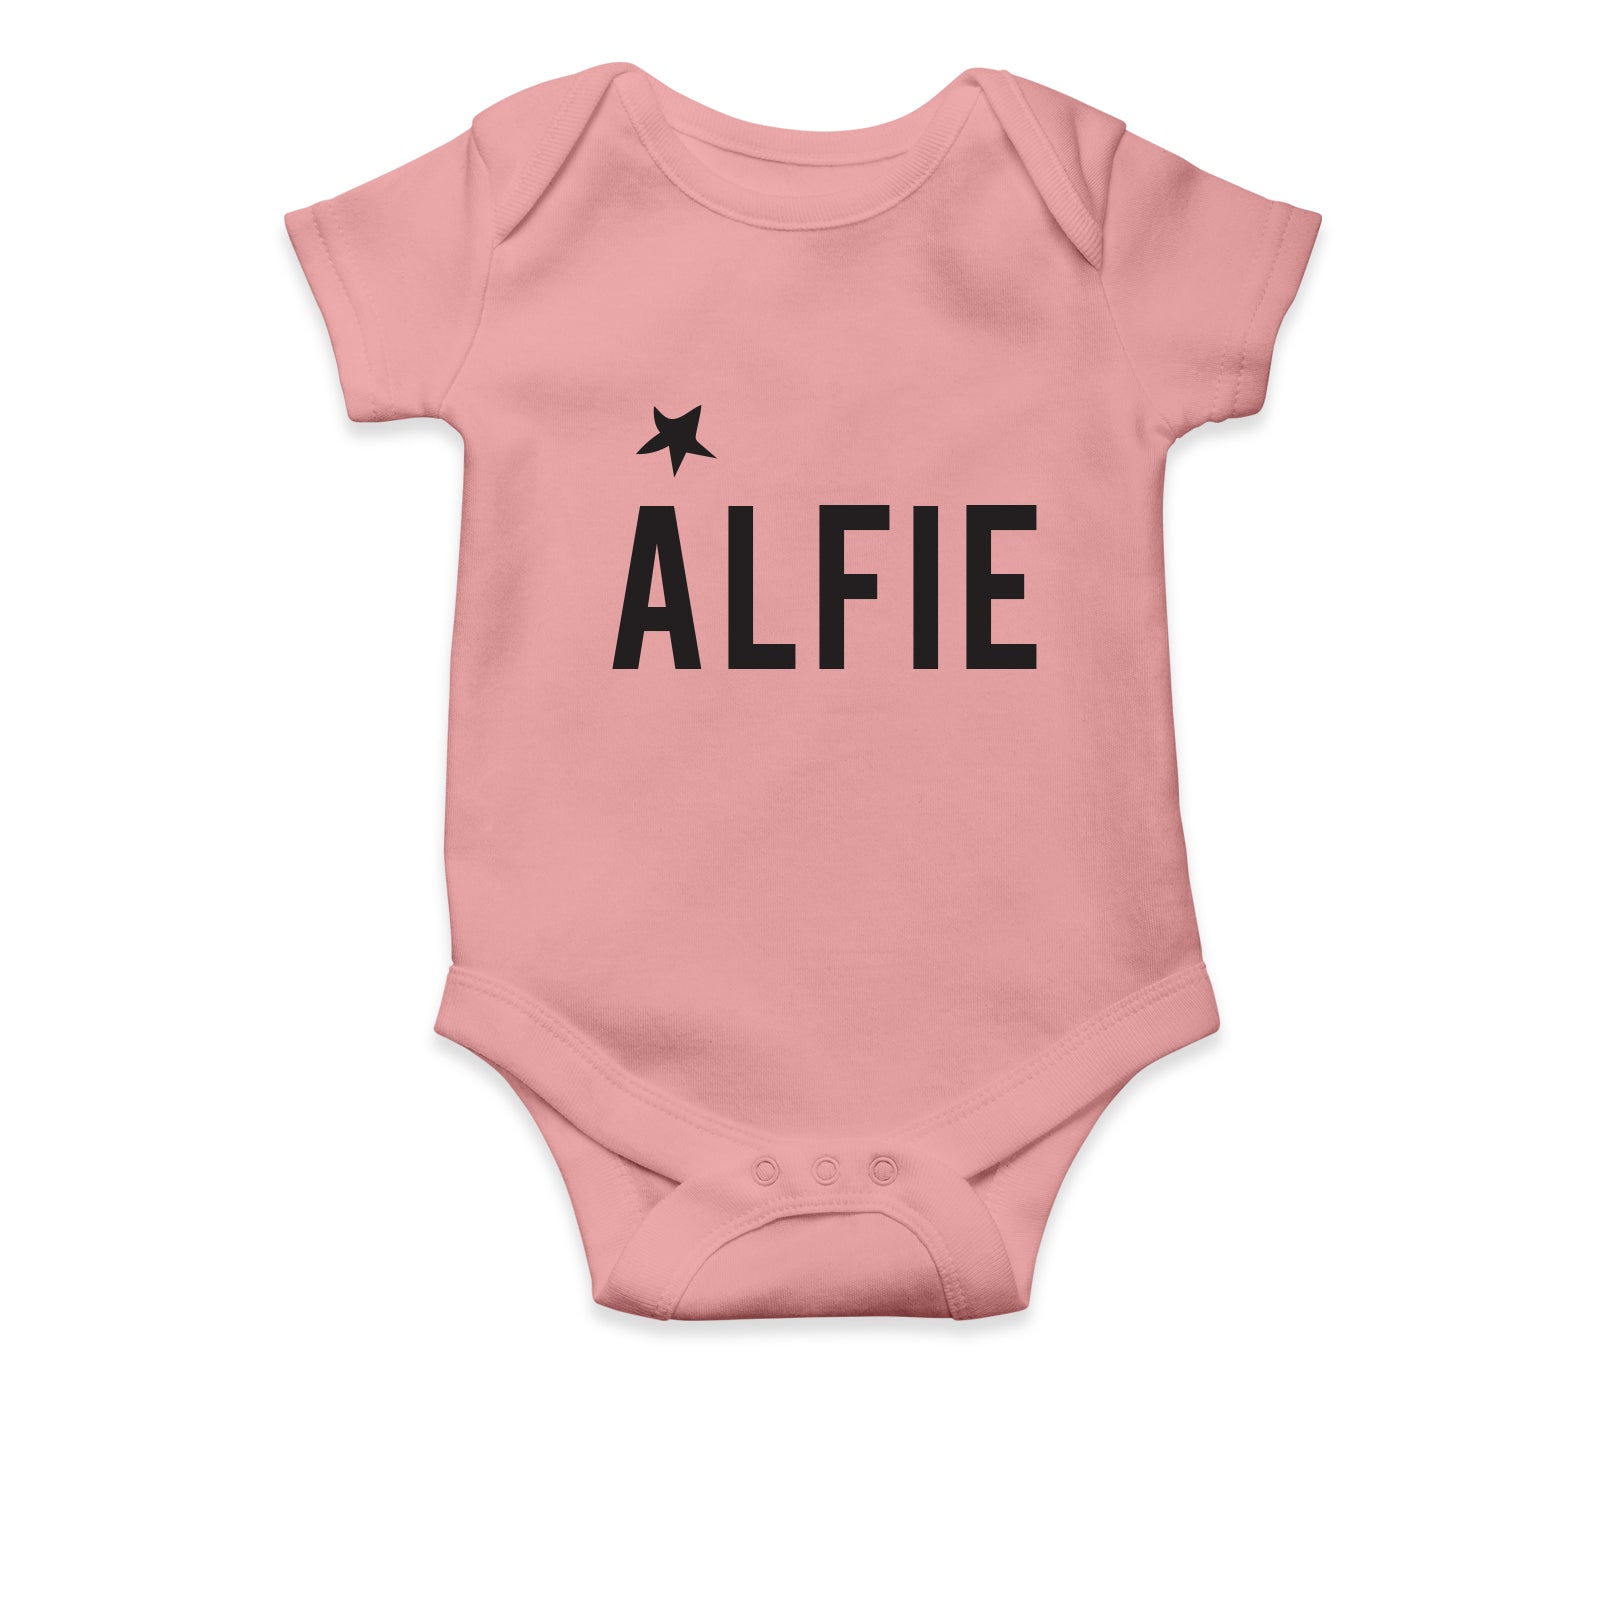 Personalised White Baby Body Suit Grow Vest - A Star